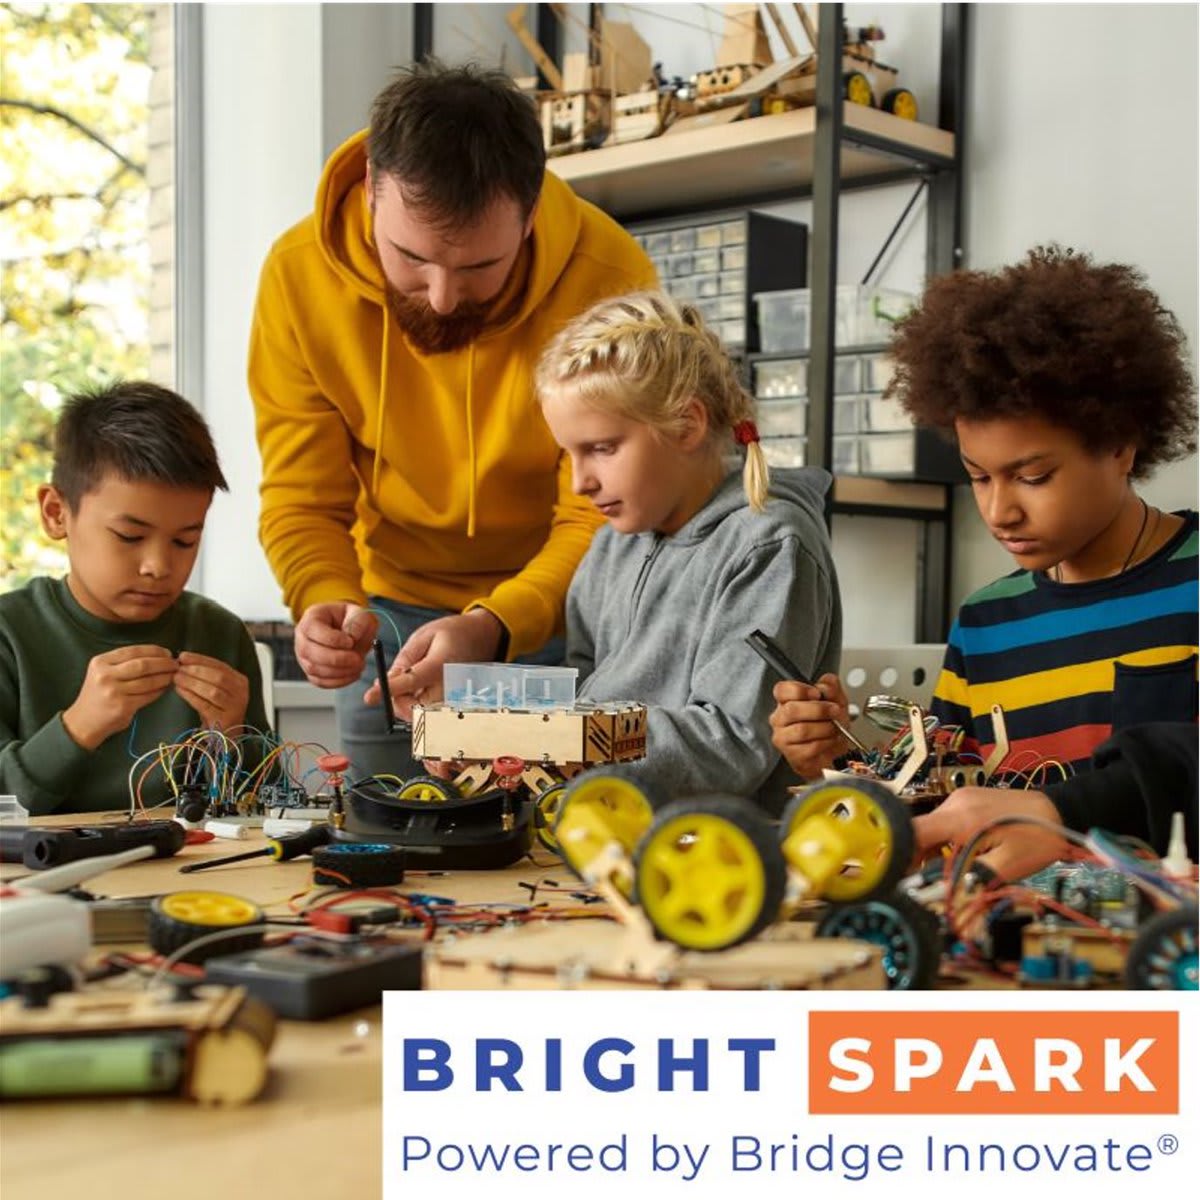 Know an aspiring designer in 4th-12th grade? Tomorrow, Sept, 24, is the deadline to register for the @BrightSparkers Invention Challenge on the "Future of Home." IDSA and @DsgnFoundation are proud to sponsor the Prototype Award! Free registration: